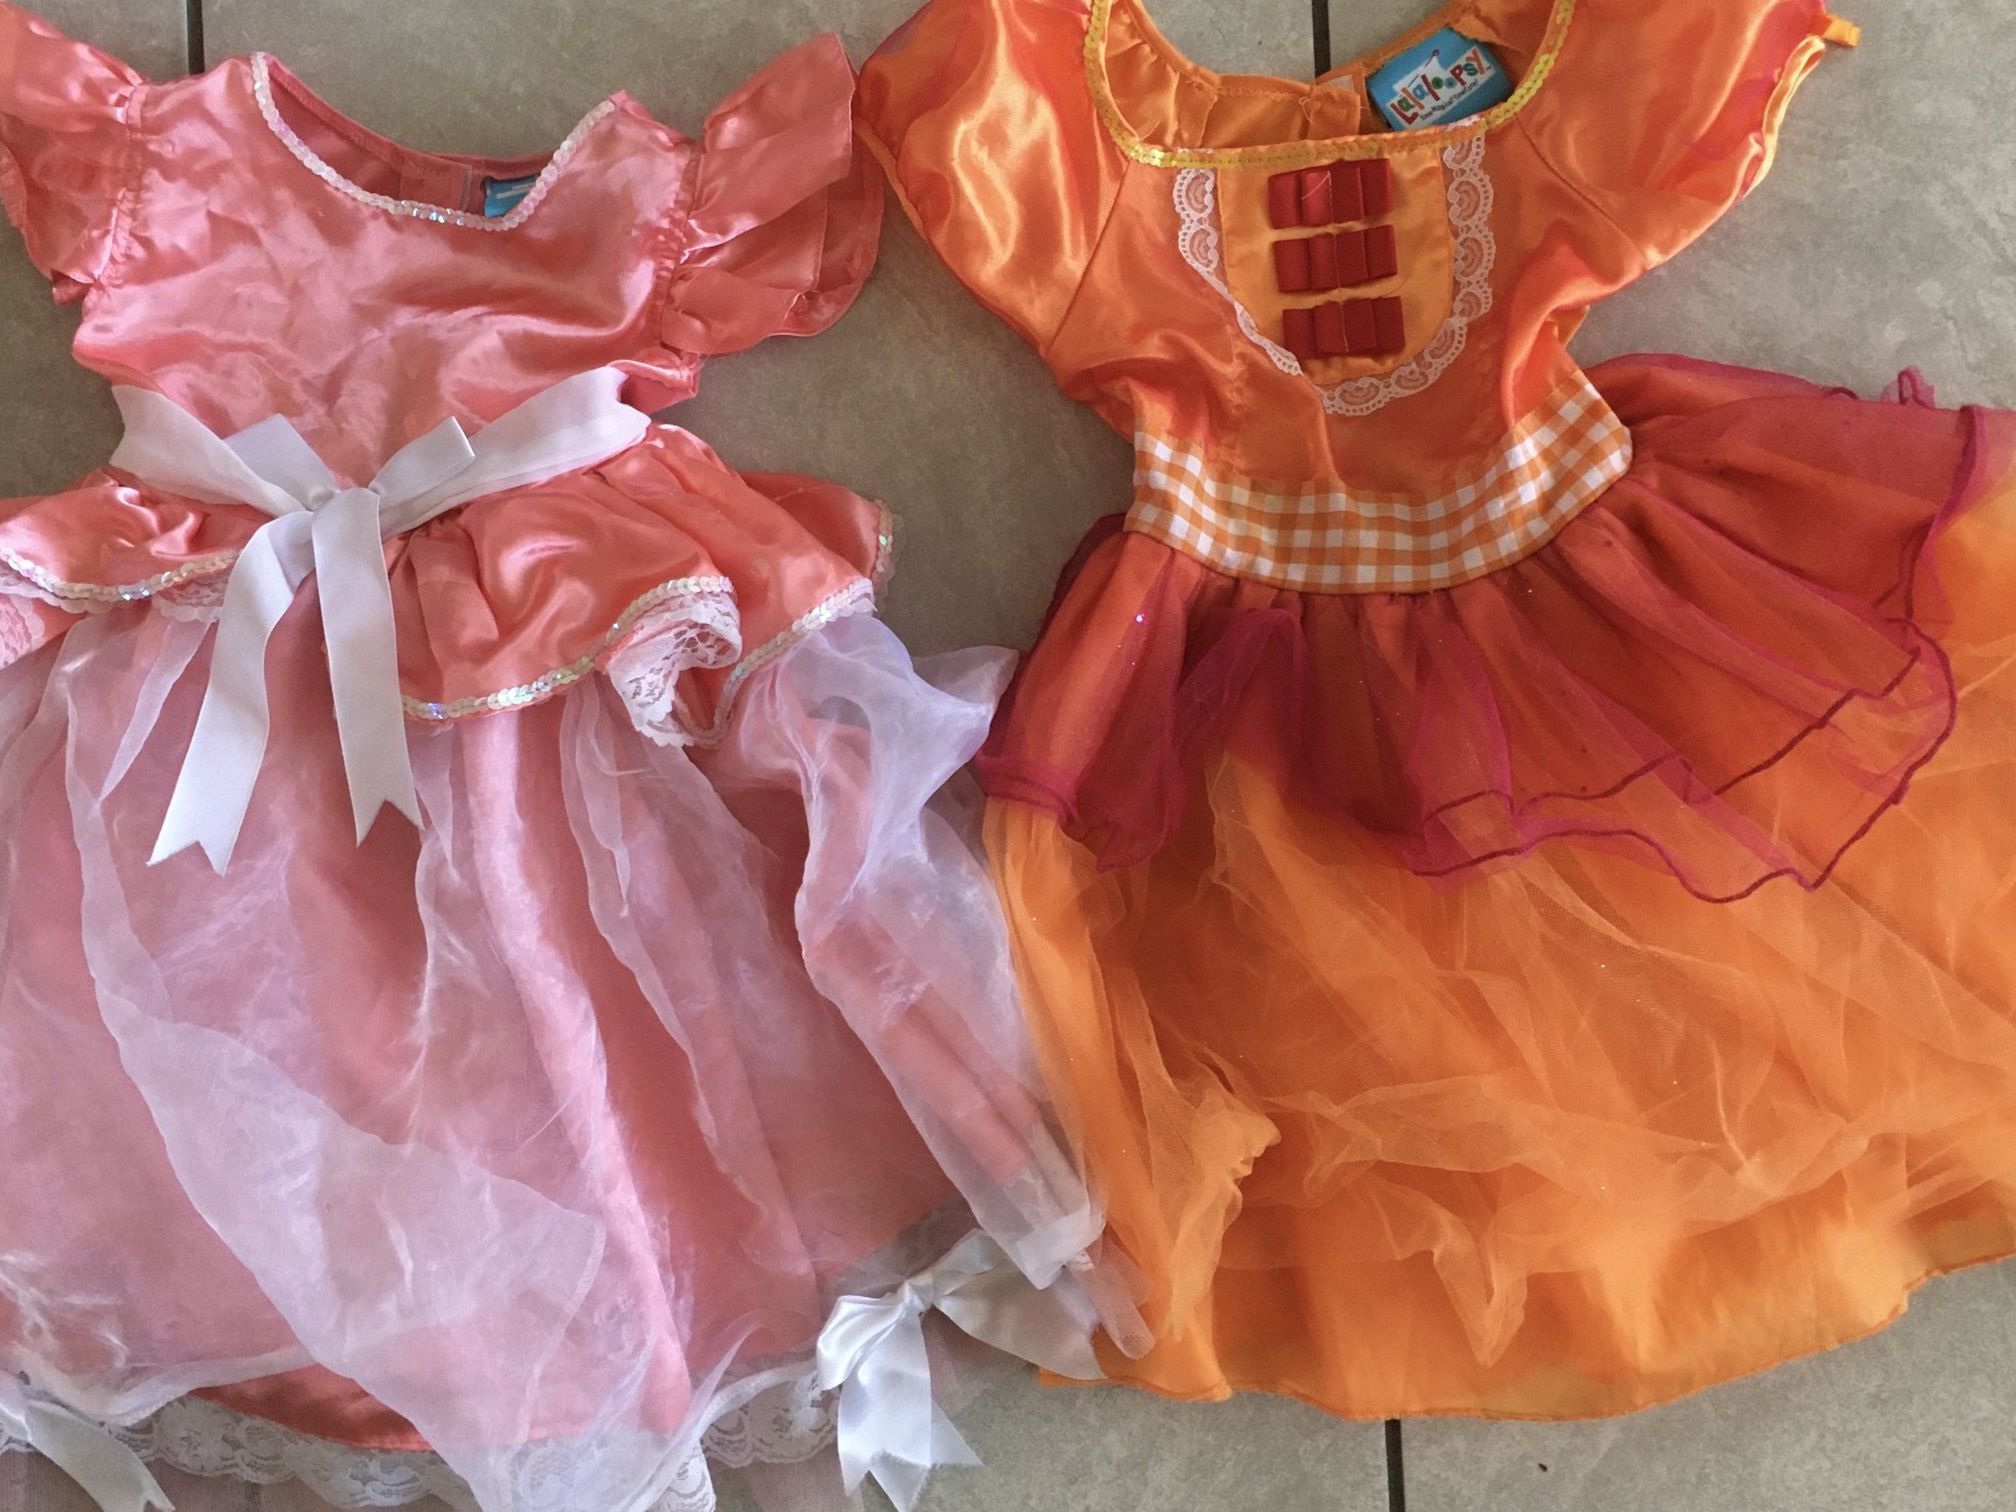 Lalaloopsy Dressup Dresses- Size 3/4/5 (says 3 And Up)